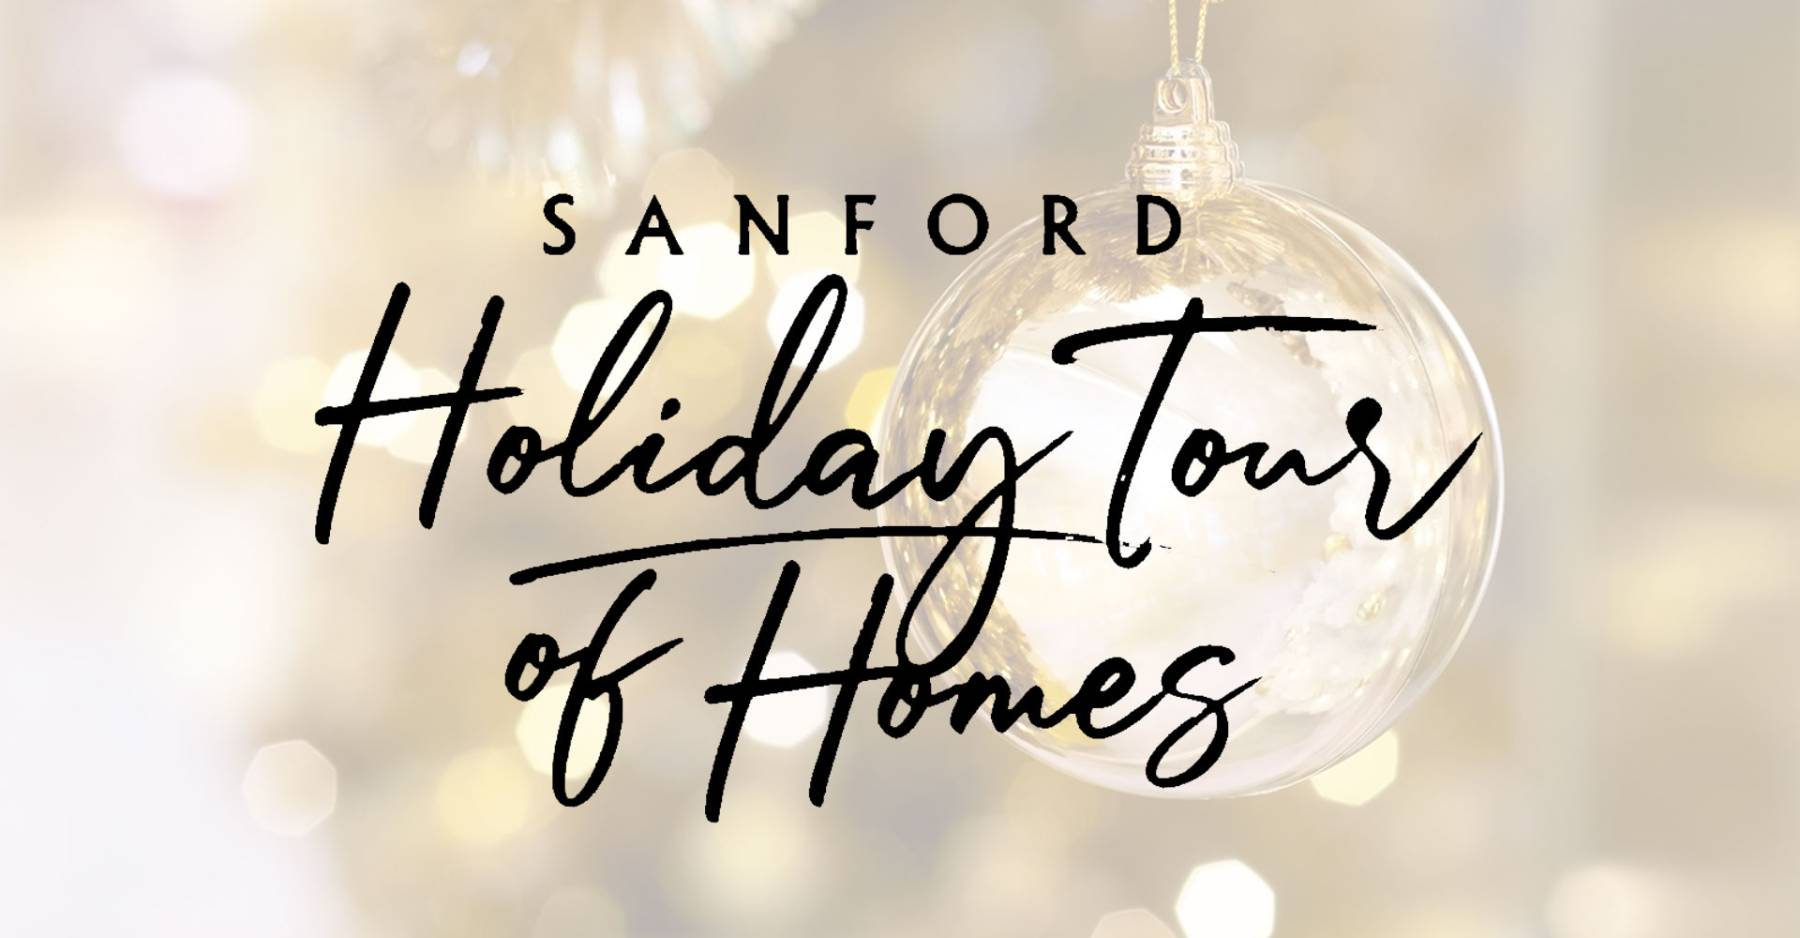 34th Annual Sanford Holiday Tour of Homes